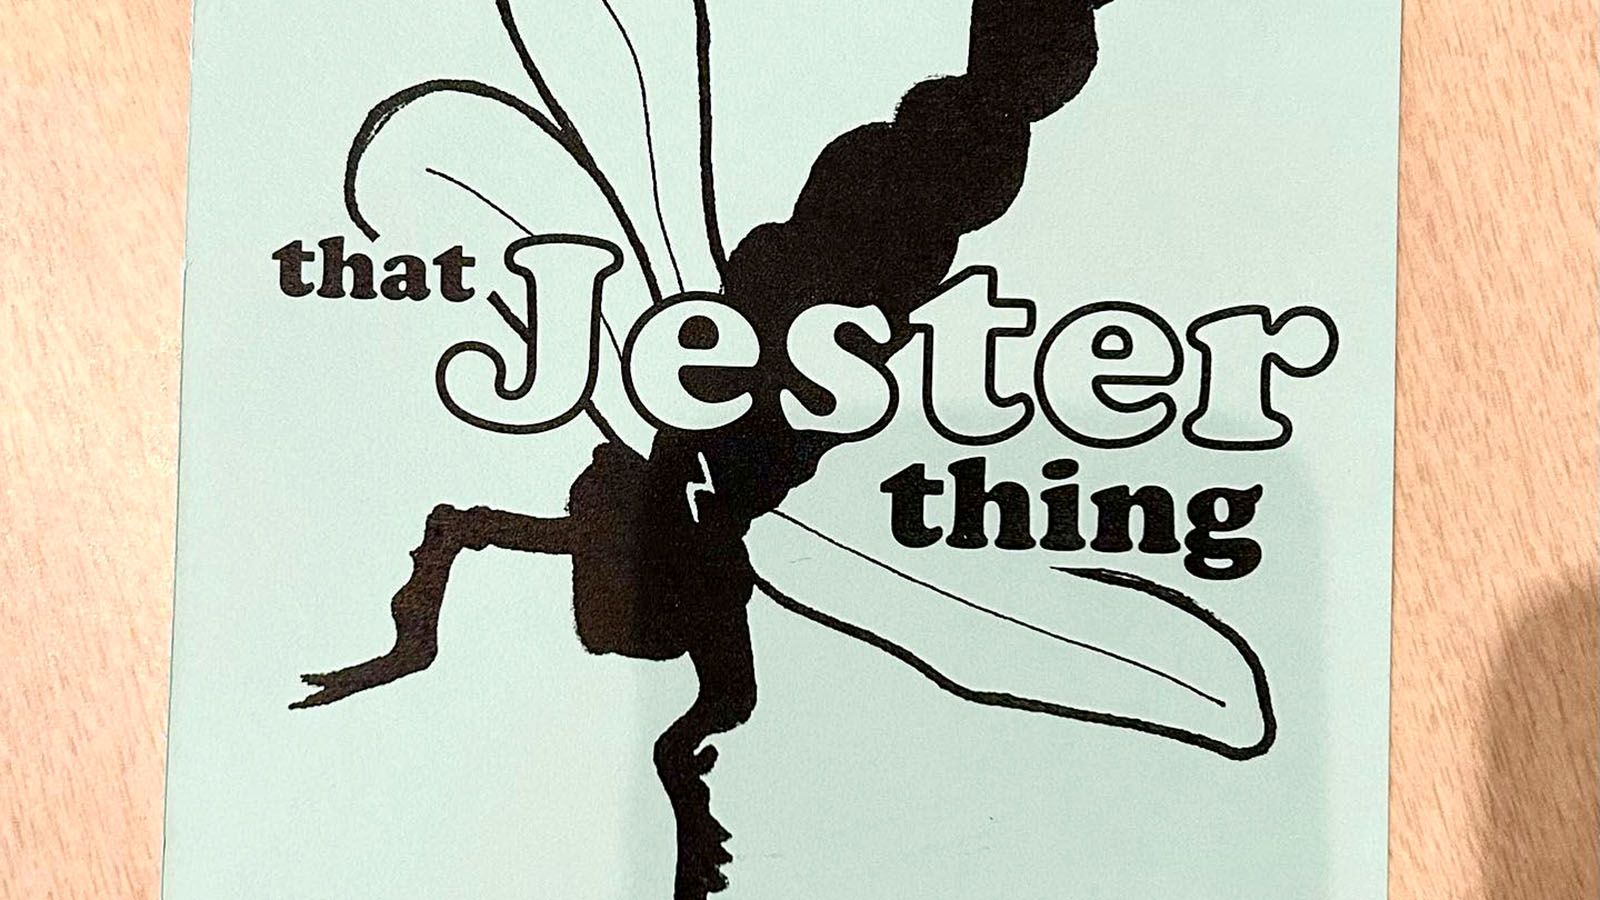 "That Jester Thing" will be at the USF North Campus Auditorium on March 11 and 12.